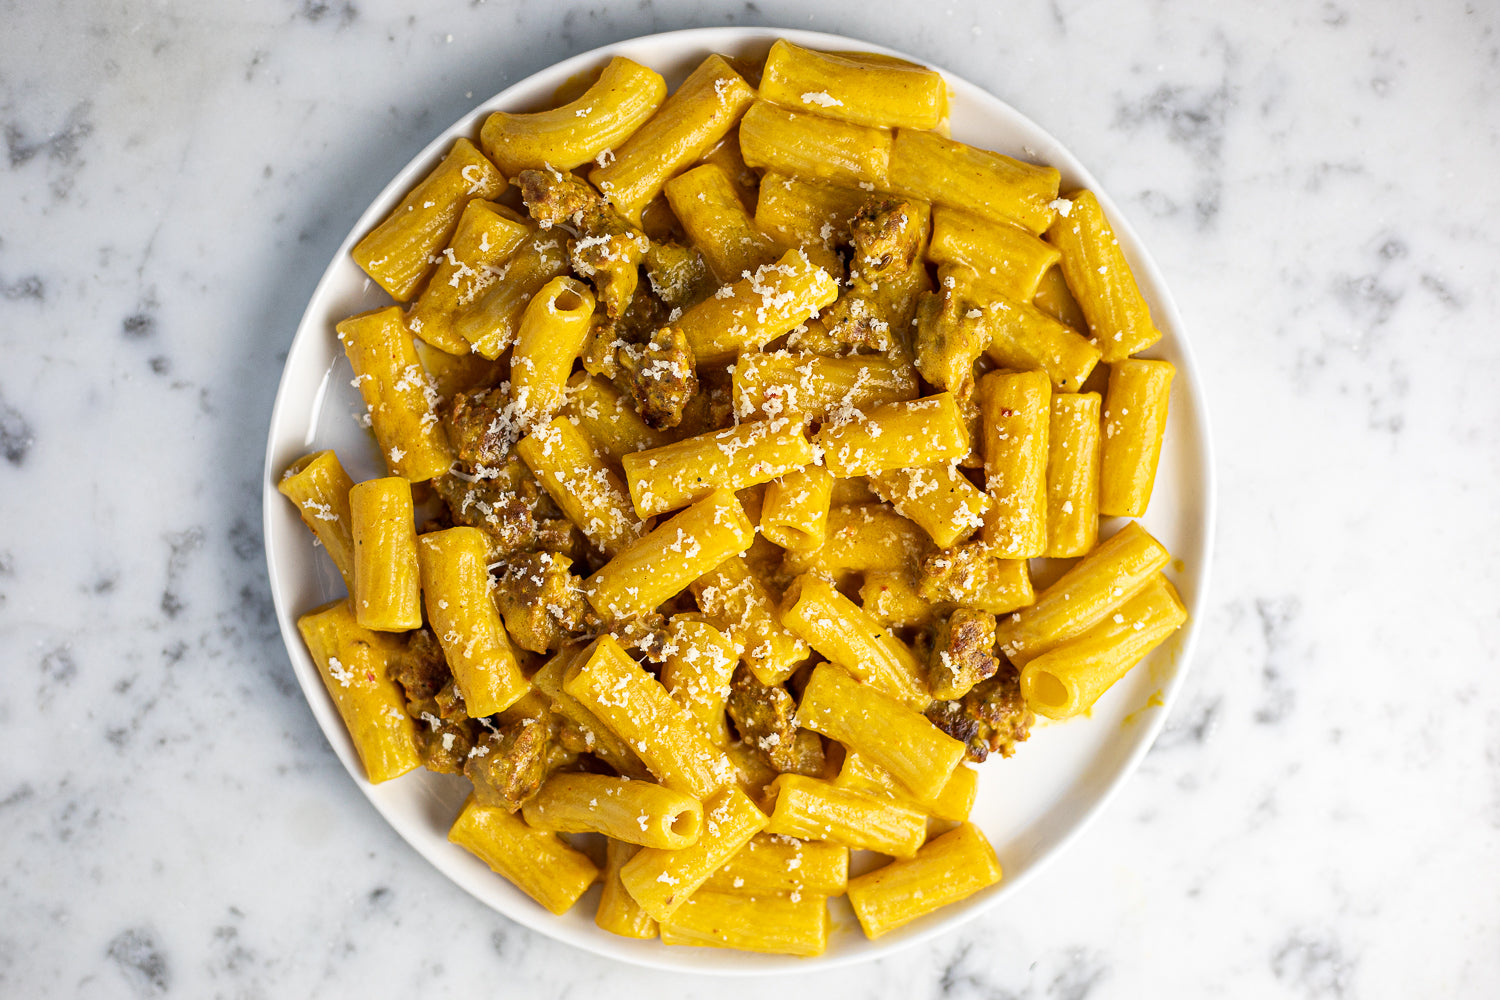 A plate of yellow colored tube pasta with crumbled bits of brown sausage. A light sprinkling of white parmesan cheese is on top.